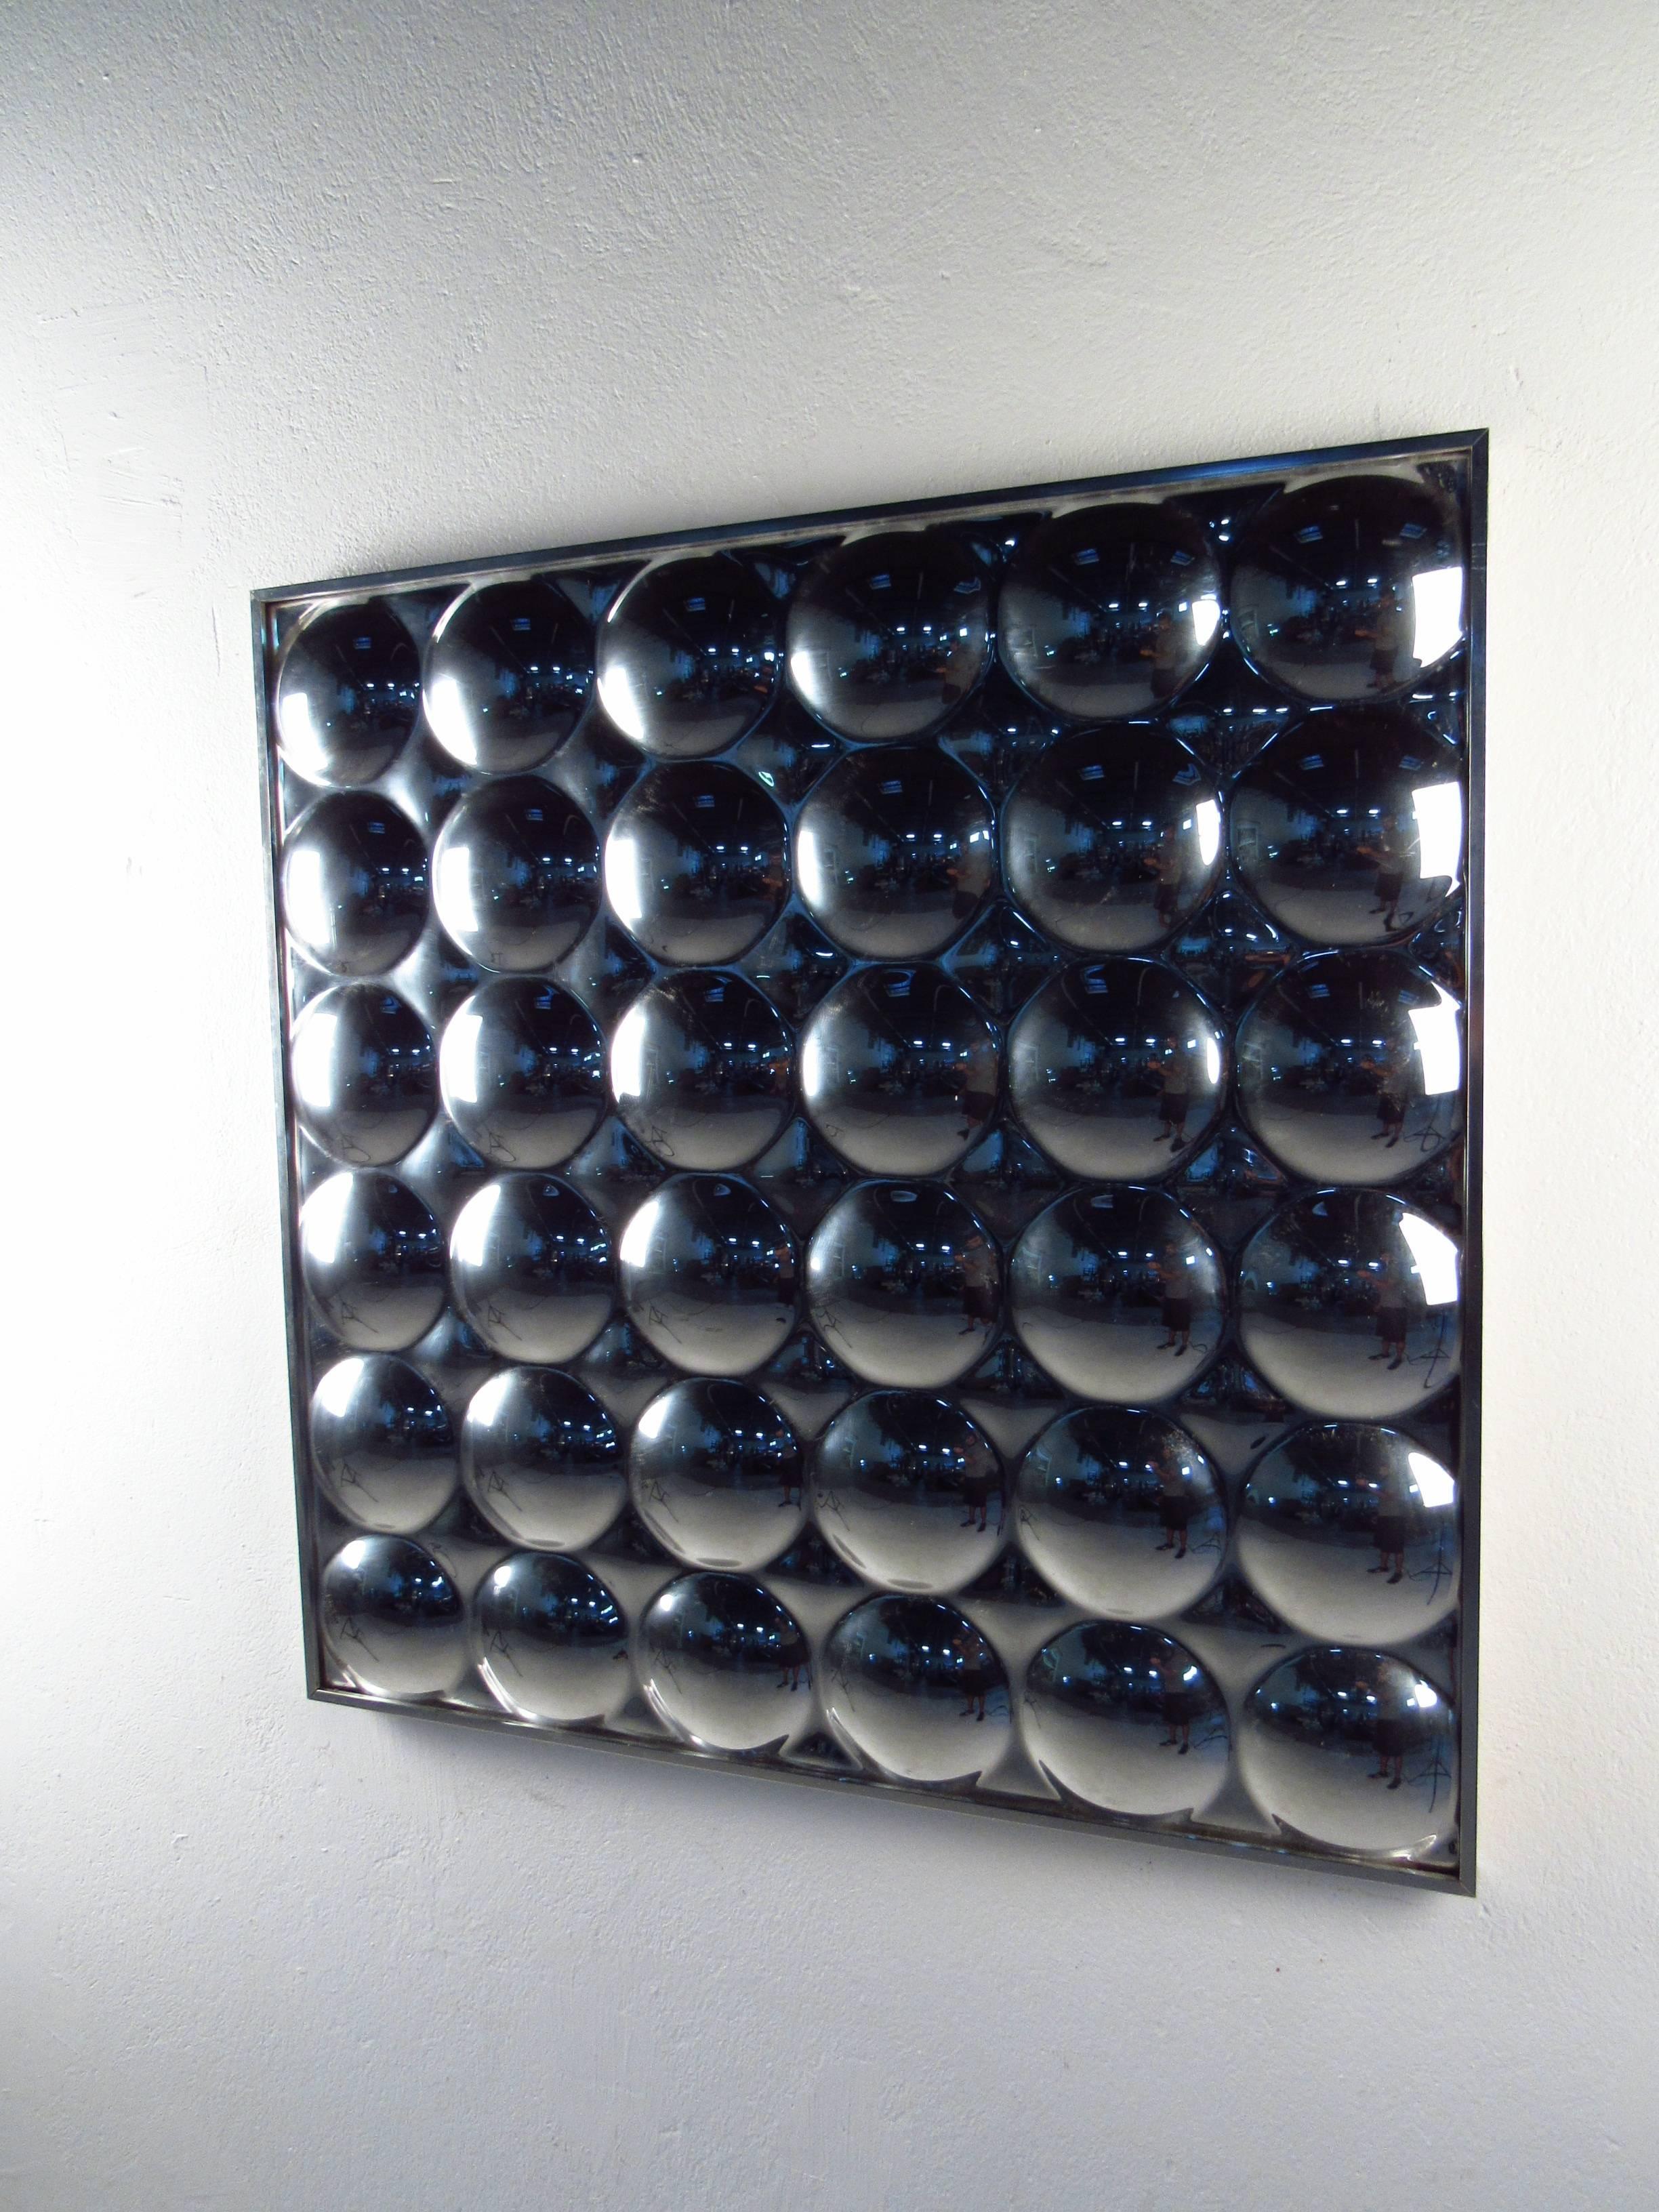 This stylish vintage wall art features 36 mirrored bubbles complete with chrome frame. The plexi-view mirror reflects and refracts everything in the room, making a unique statement in any interior. (Please confirm item location NY or NY.)